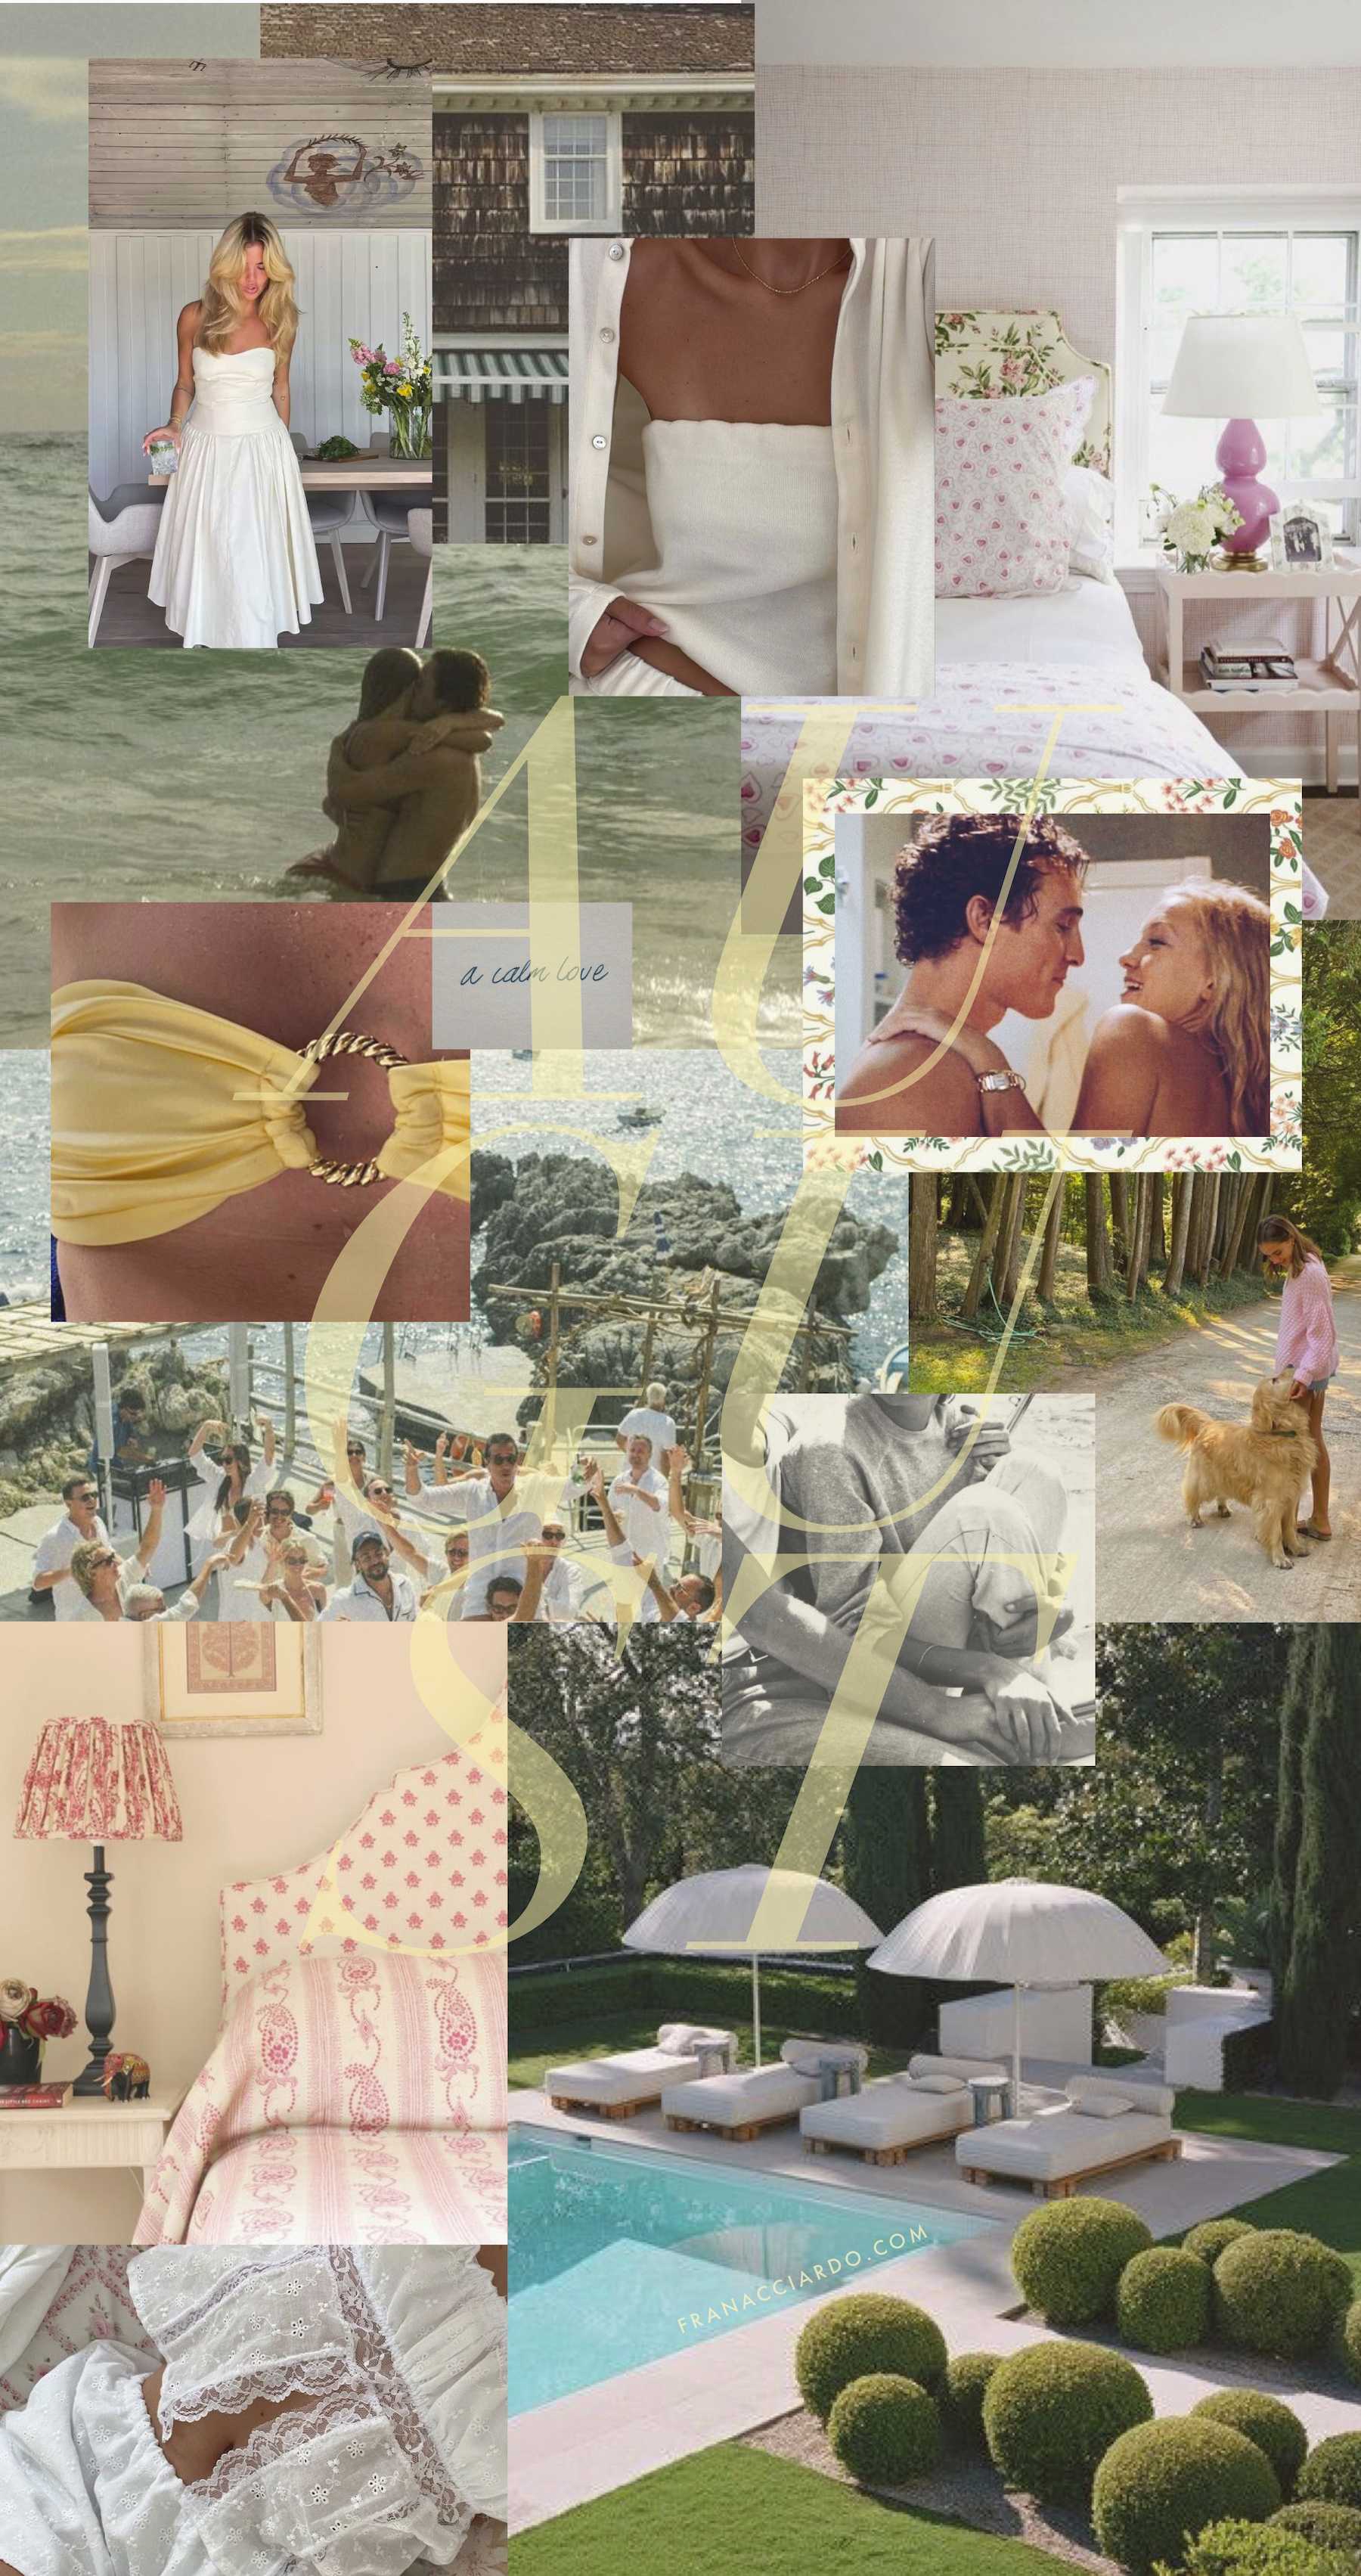 fran acciardo August 2022 mood board summer blue and white Italy European vacation  preppy nyc desktop wallpaper iphone wallpaper aesthetic download vibes